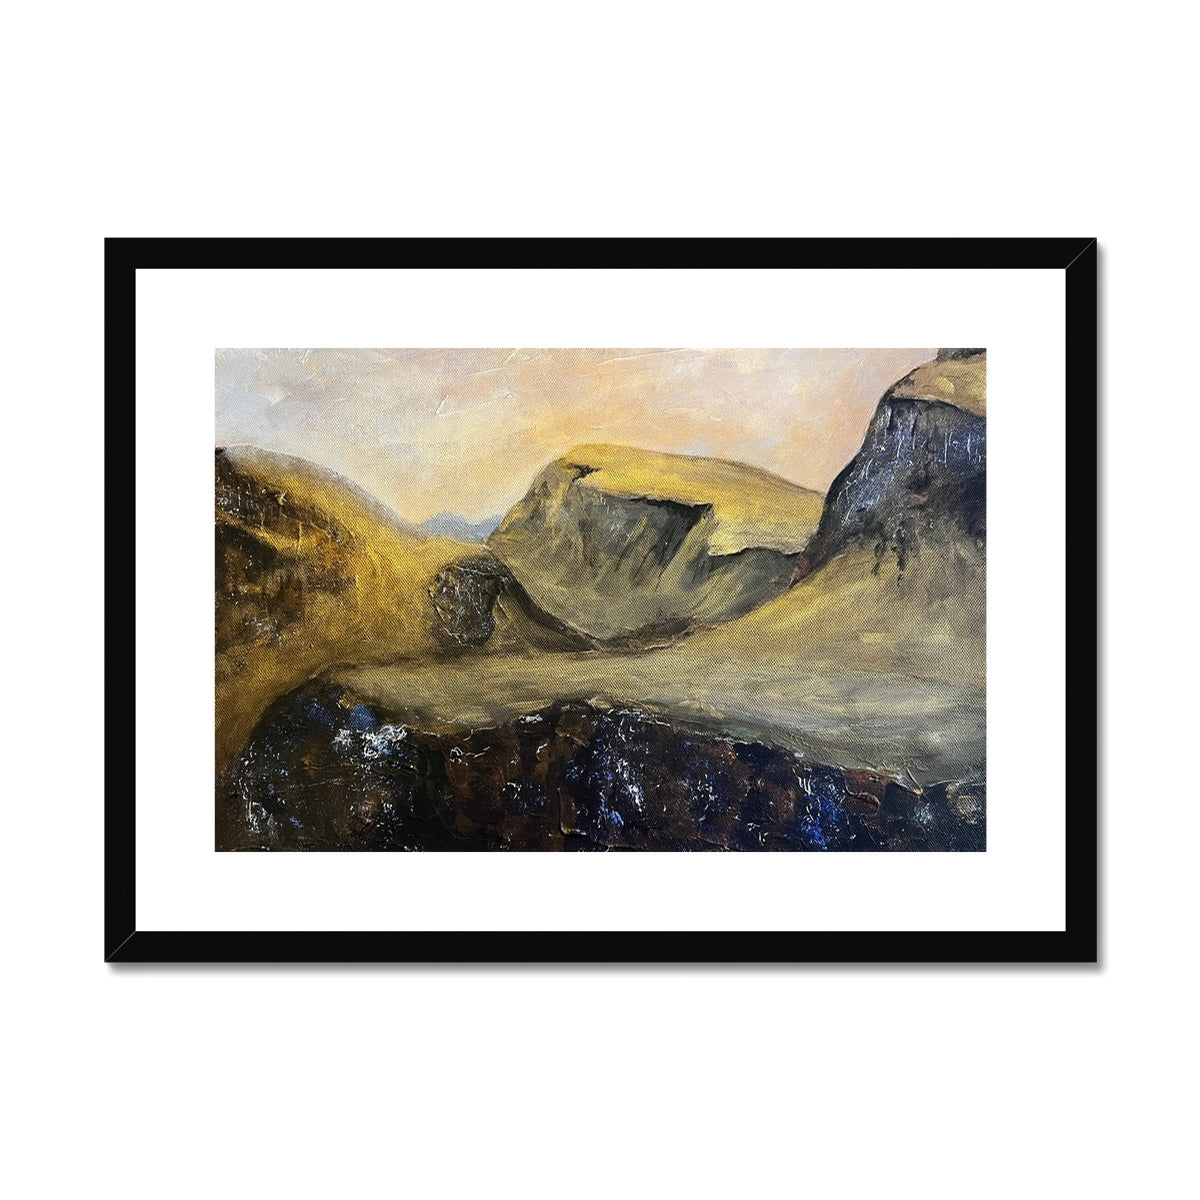 The Quiraing Skye Painting | Framed & Mounted Prints From Scotland-Framed & Mounted Prints-Skye Art Gallery-A2 Landscape-Black Frame-Paintings, Prints, Homeware, Art Gifts From Scotland By Scottish Artist Kevin Hunter